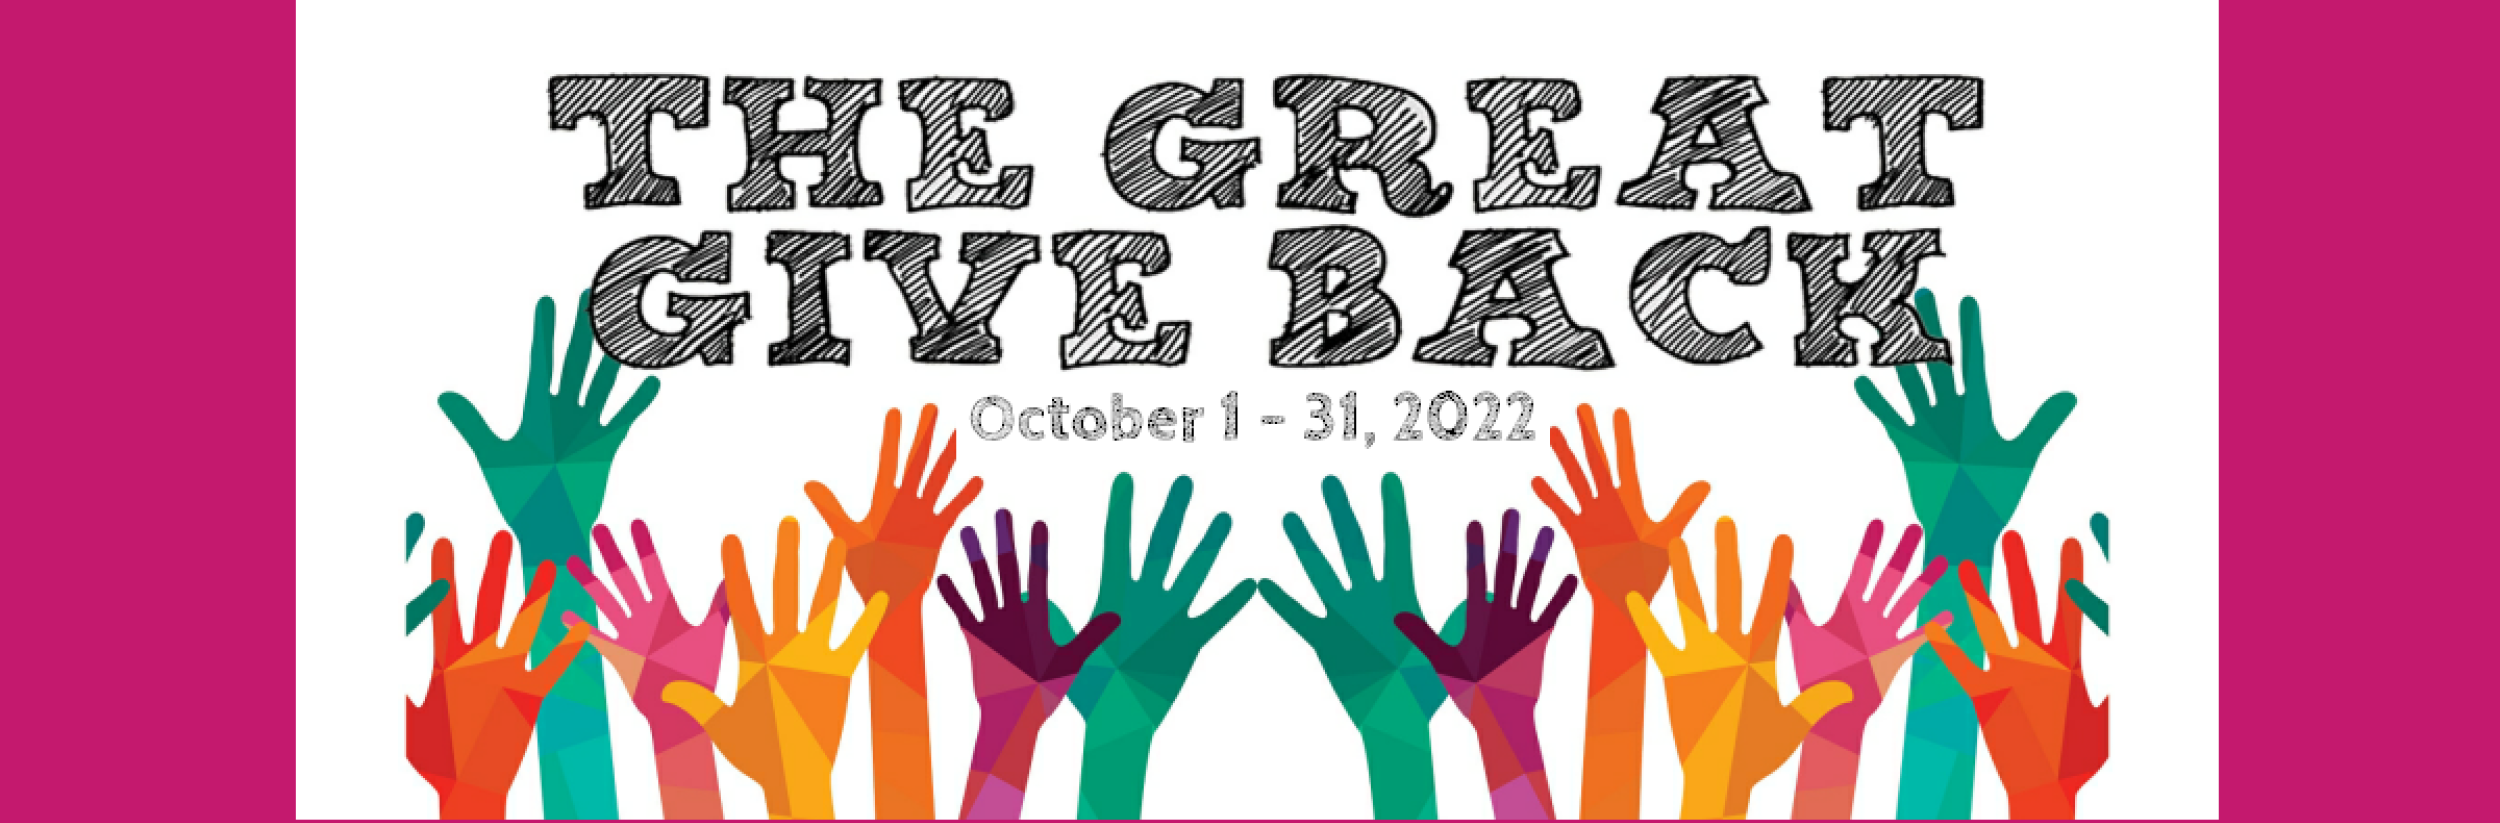 Image for "The Great Give Back 2022"